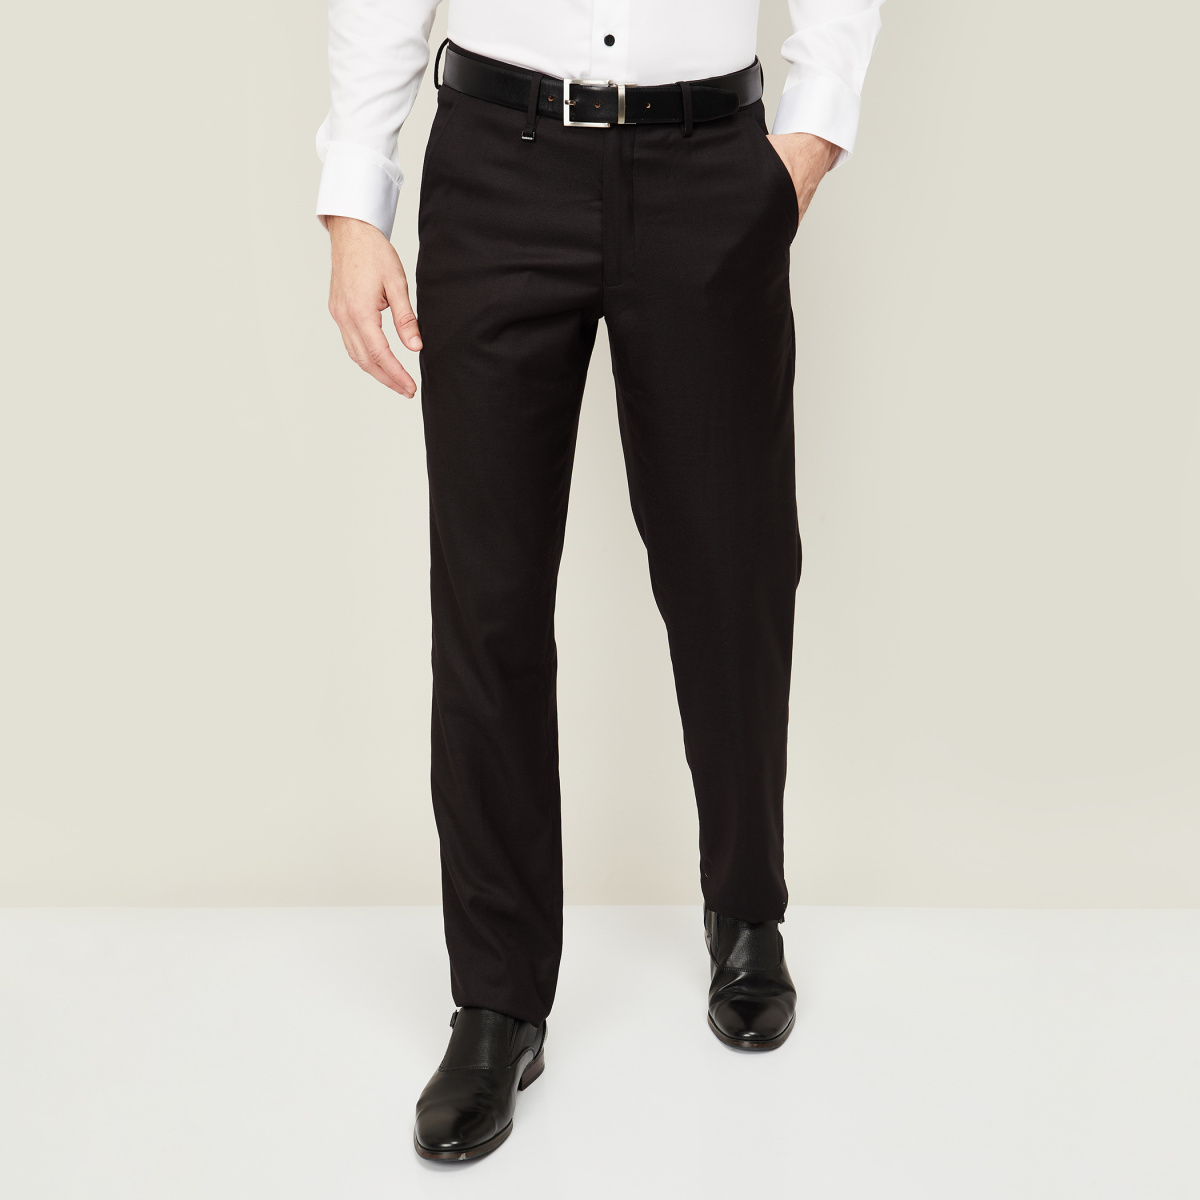 Occasions | Grey Regular Fit Suit Trousers | SuitDirect.co.uk